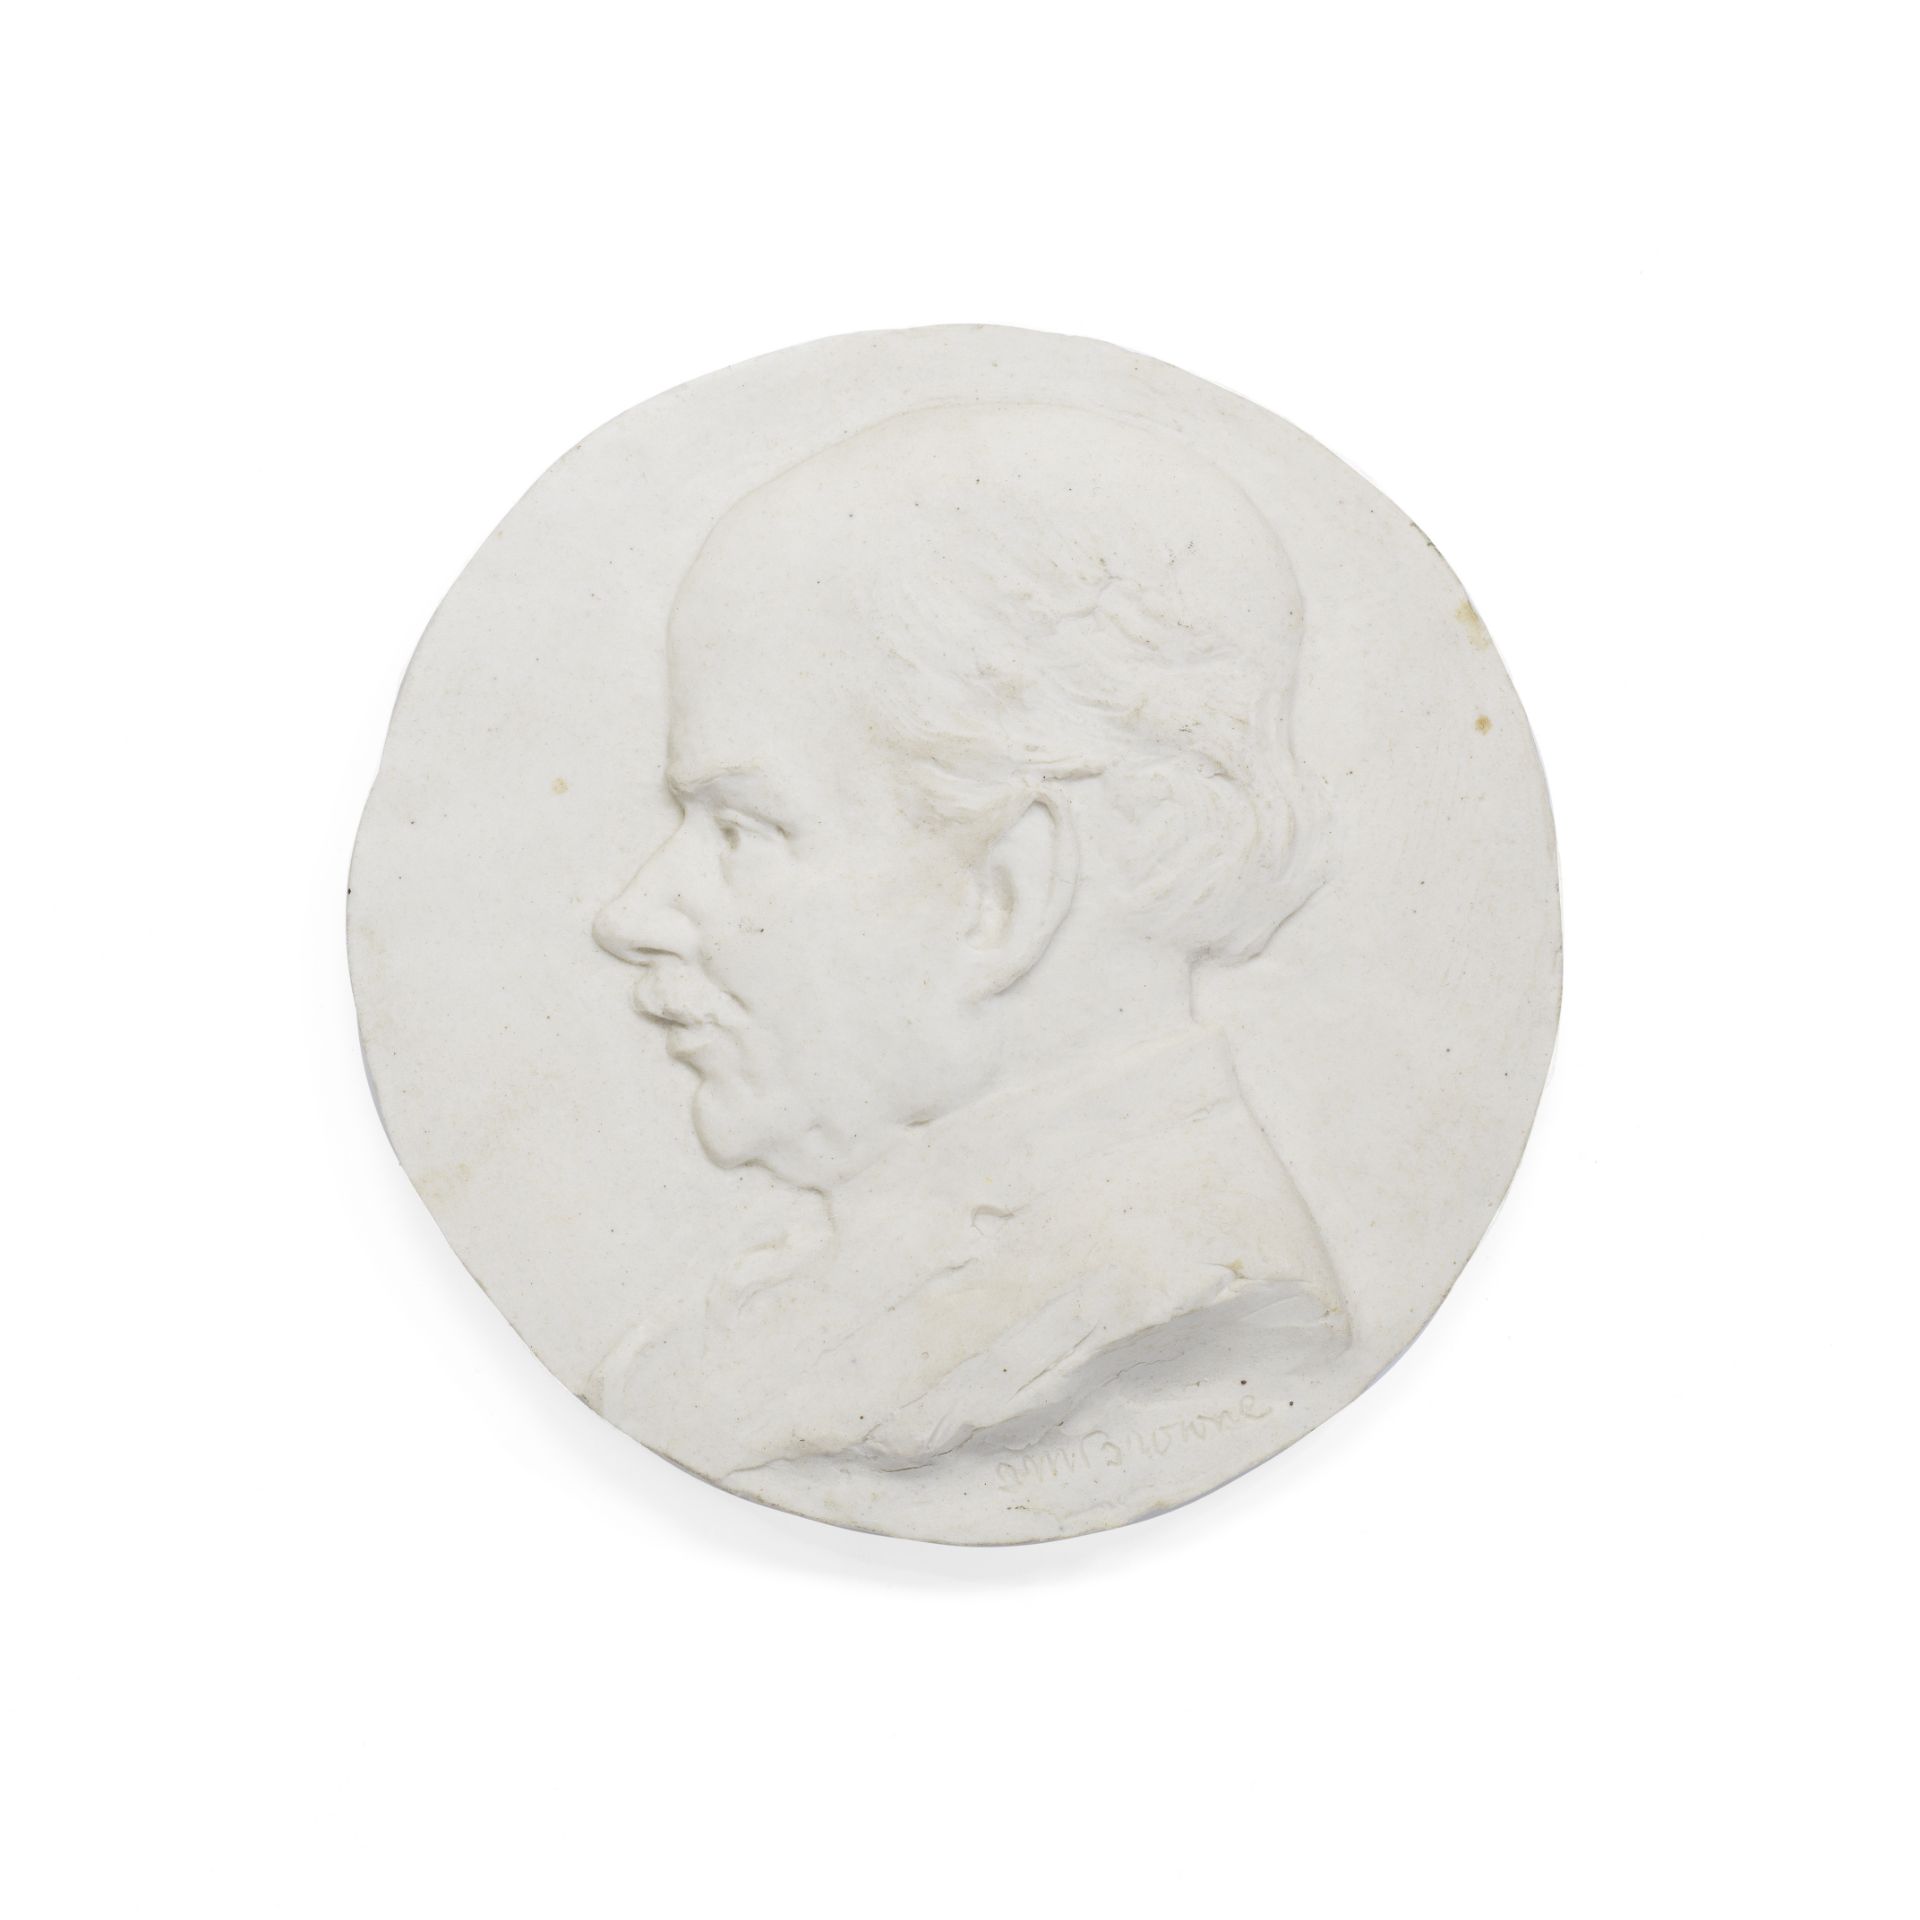 Attributed to the Martin Brothers Portrait plaque, circa 1900